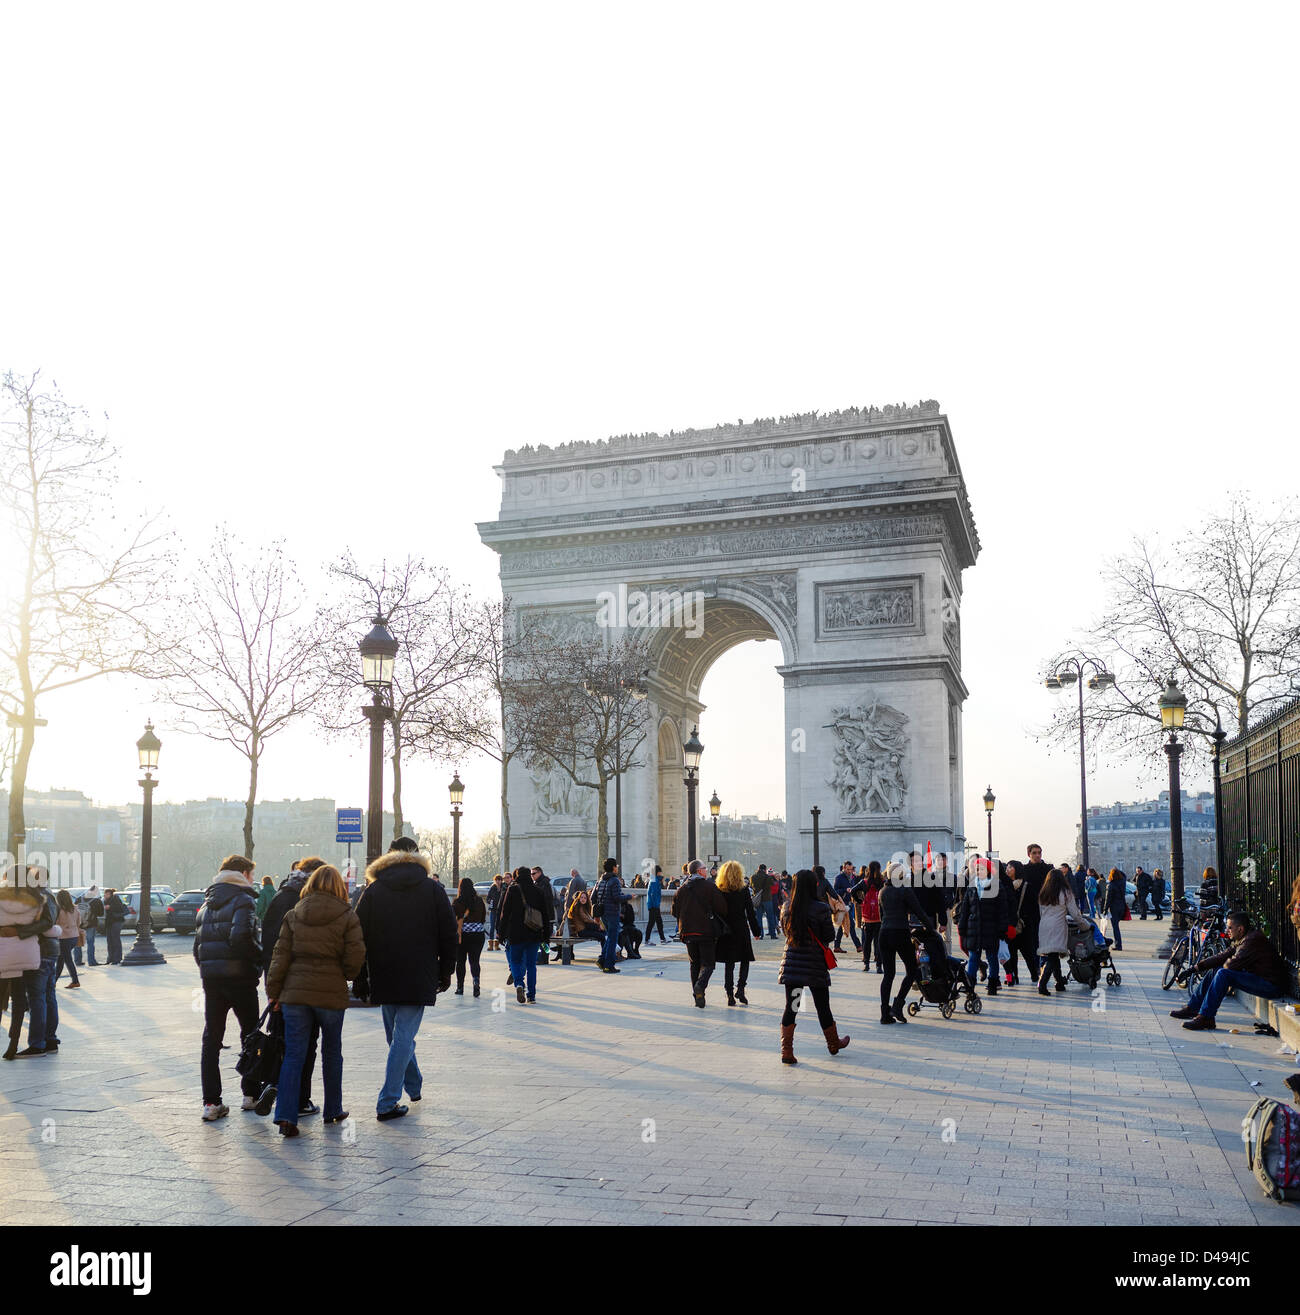 Paris in march. Arc de Triomphe in the background. Stock Photo